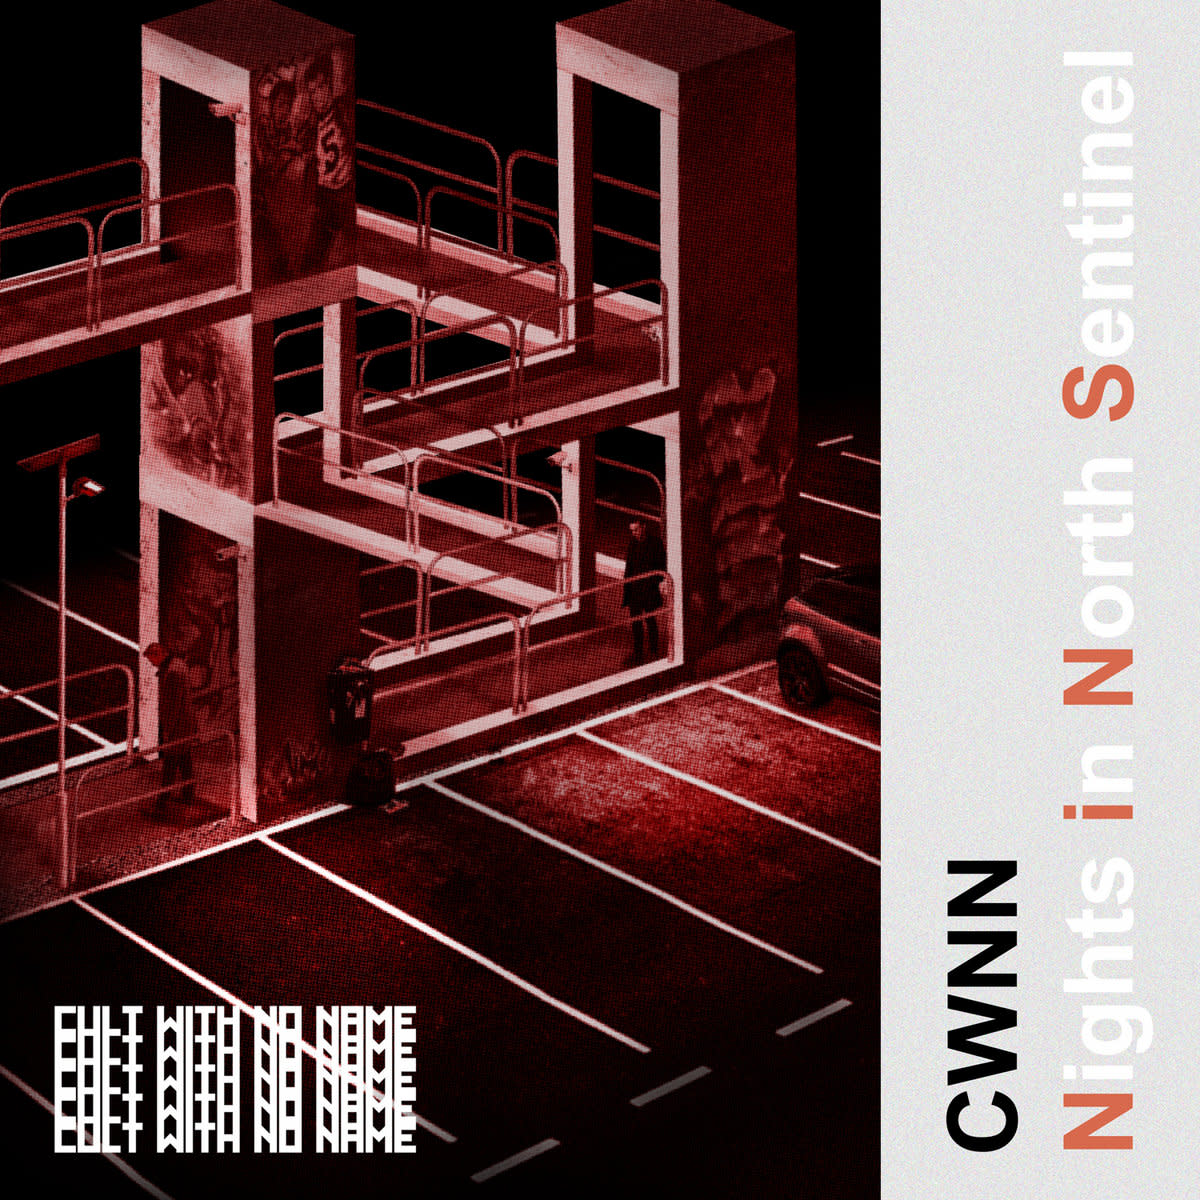 synthpop-album-review-nights-in-north-sentinel-by-cult-with-no-name